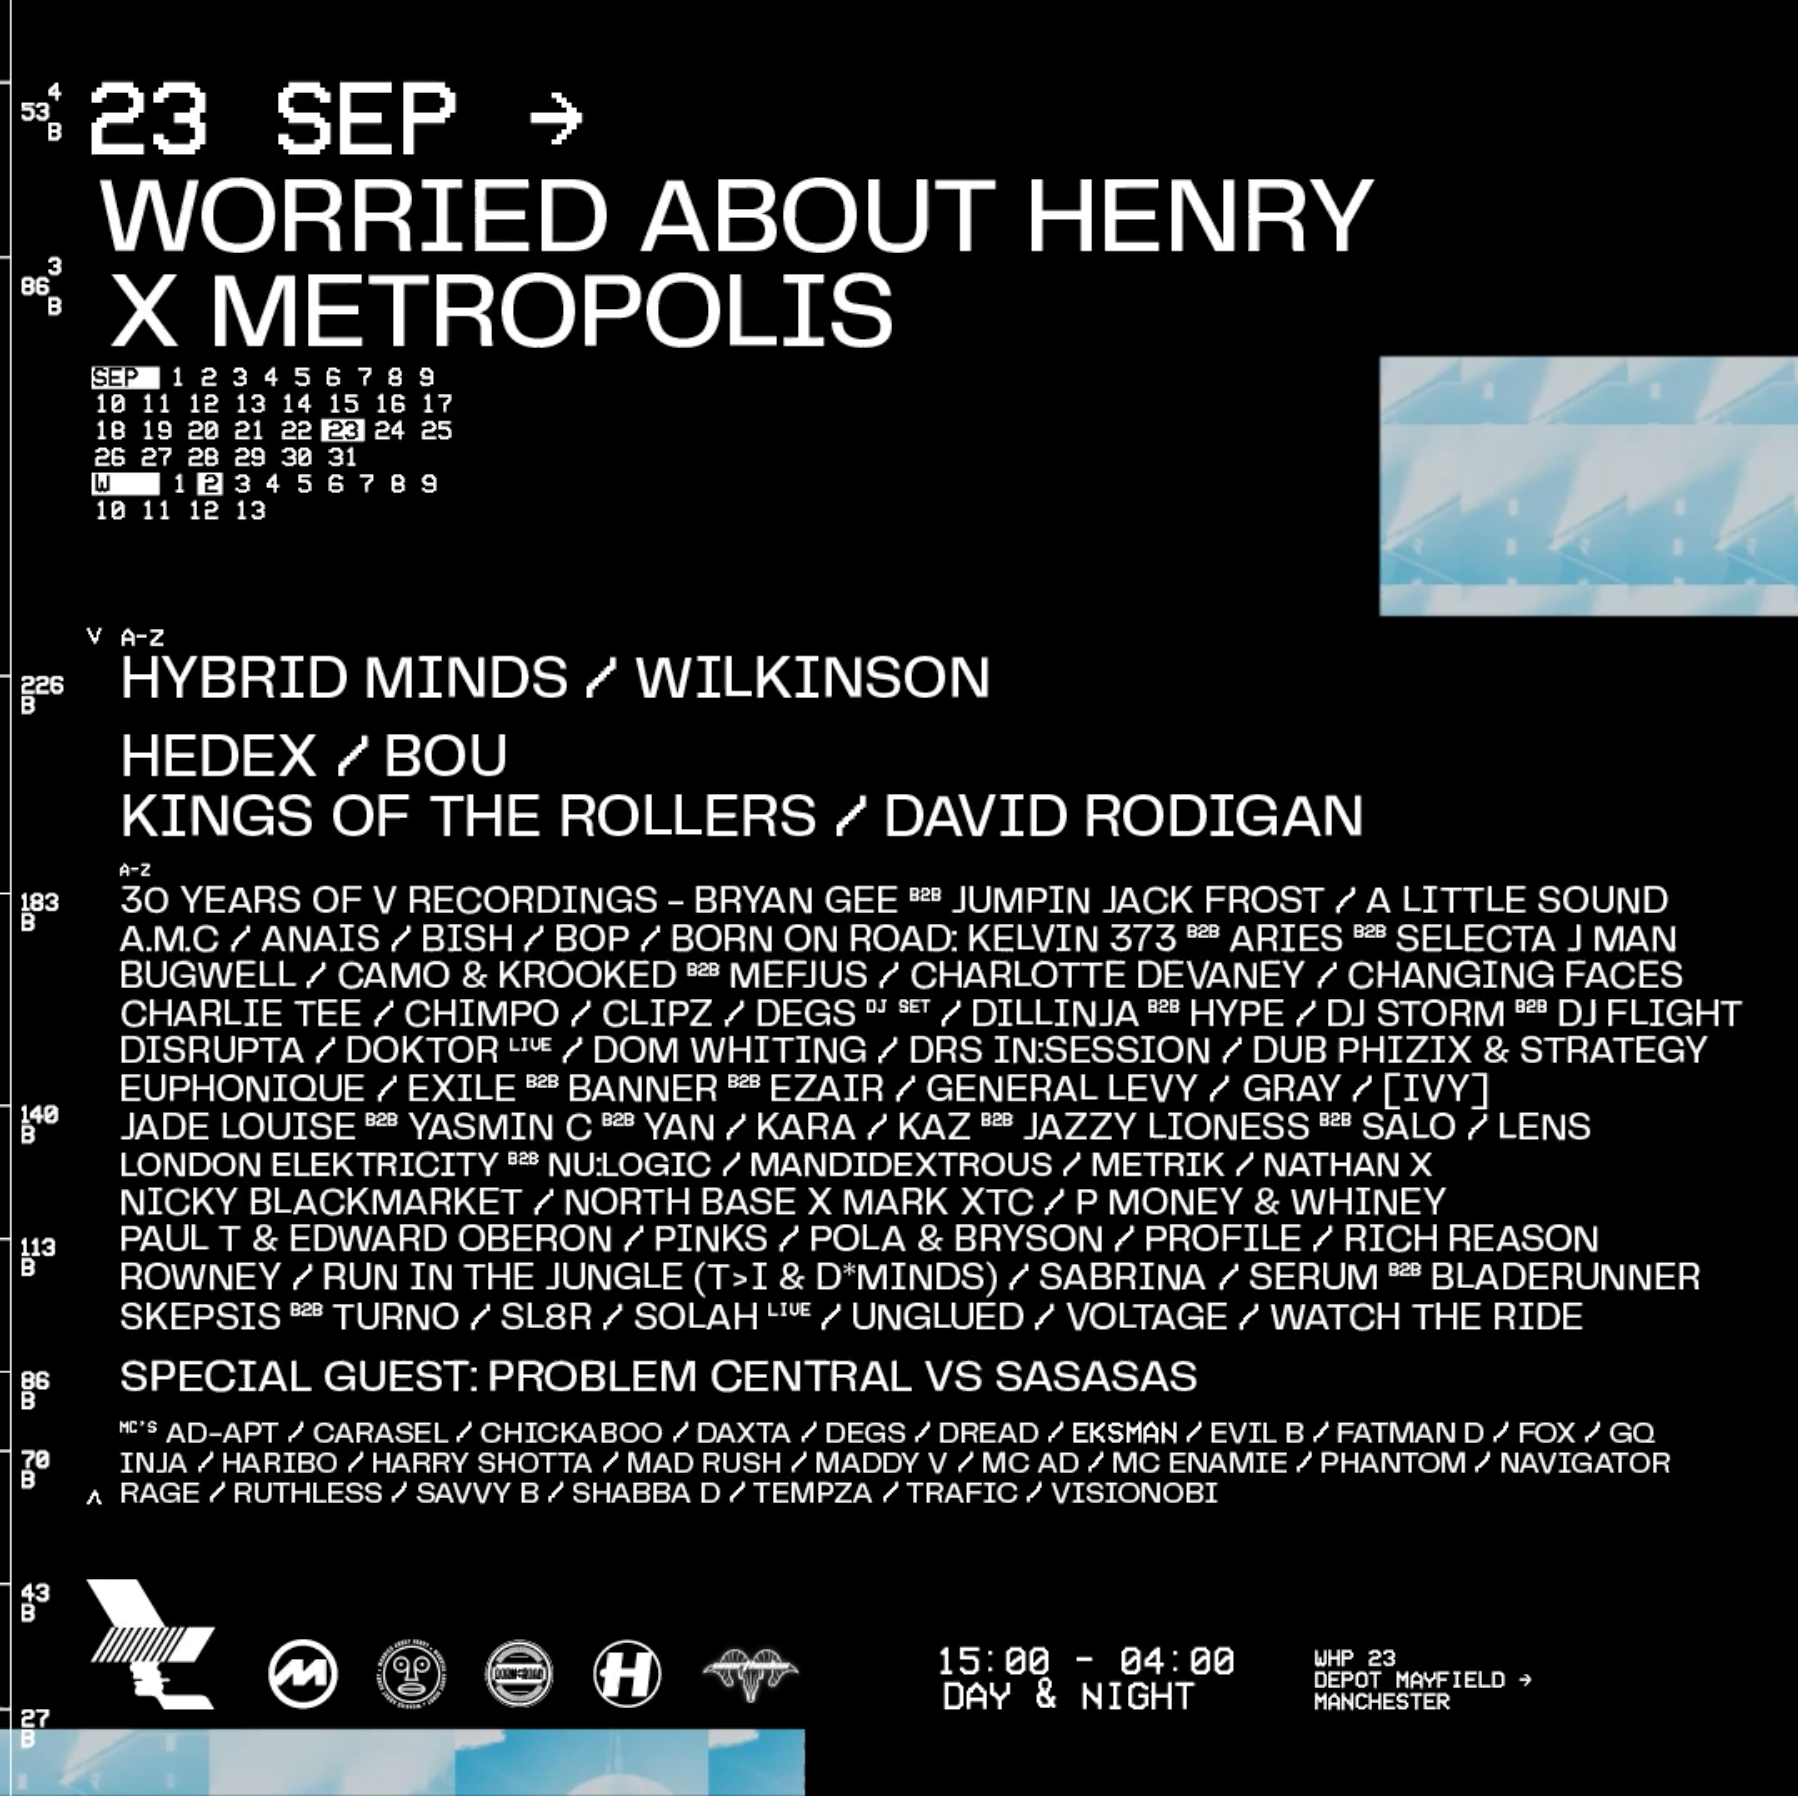 Worried About Henry x Metropolis - Página frontal